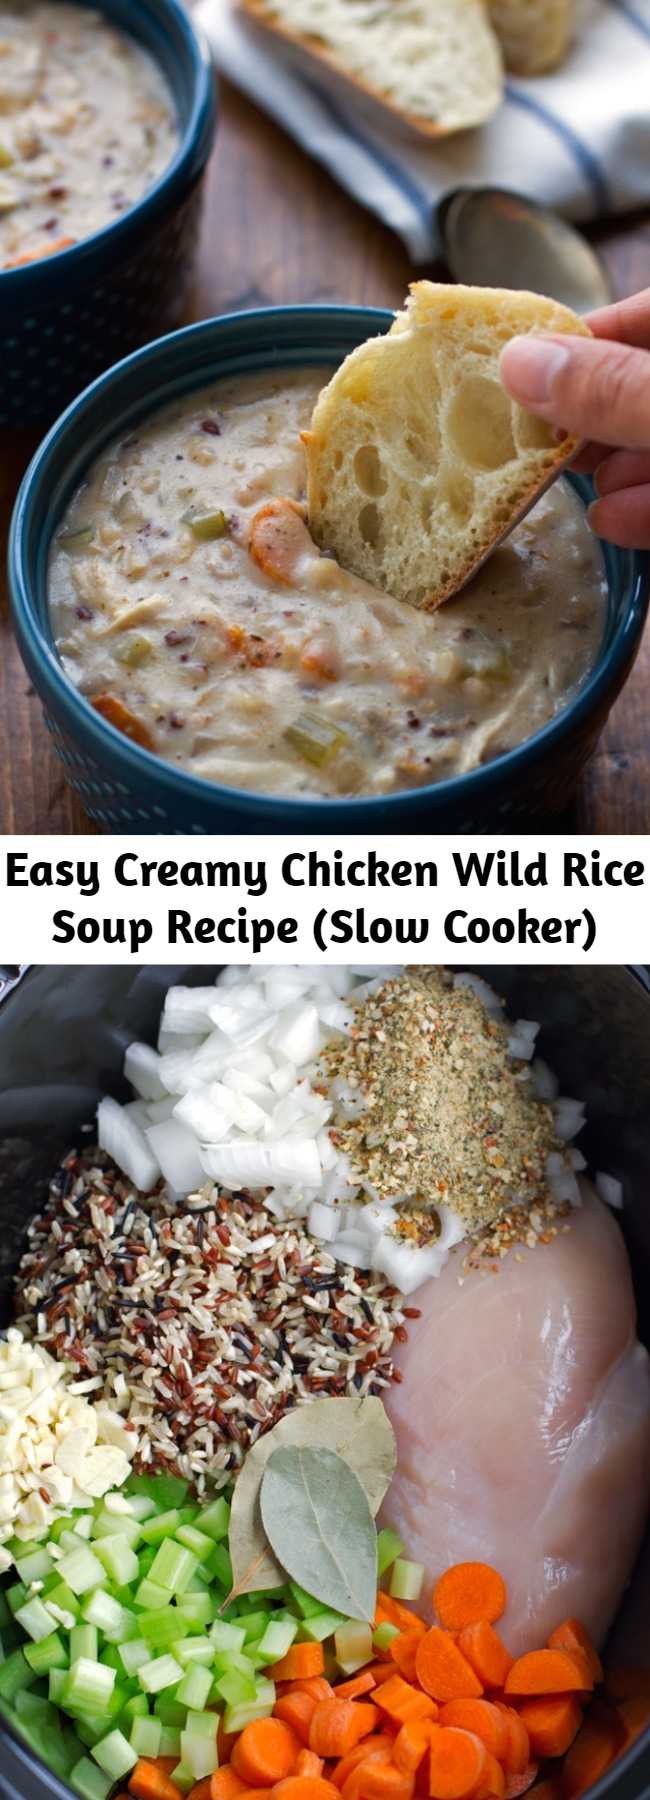 Easy Creamy Chicken Wild Rice Soup Recipe (Slow Cooker) - A warm and cozy chicken wild rice soup made right in the slow cooker. This soup is loaded with carrots, celery, boneless chicken and of course, wild rice! It’s the perfect slow cooker meal for a chilly winter night! The best part is, you’ve probably got most of these ingredients at home already!